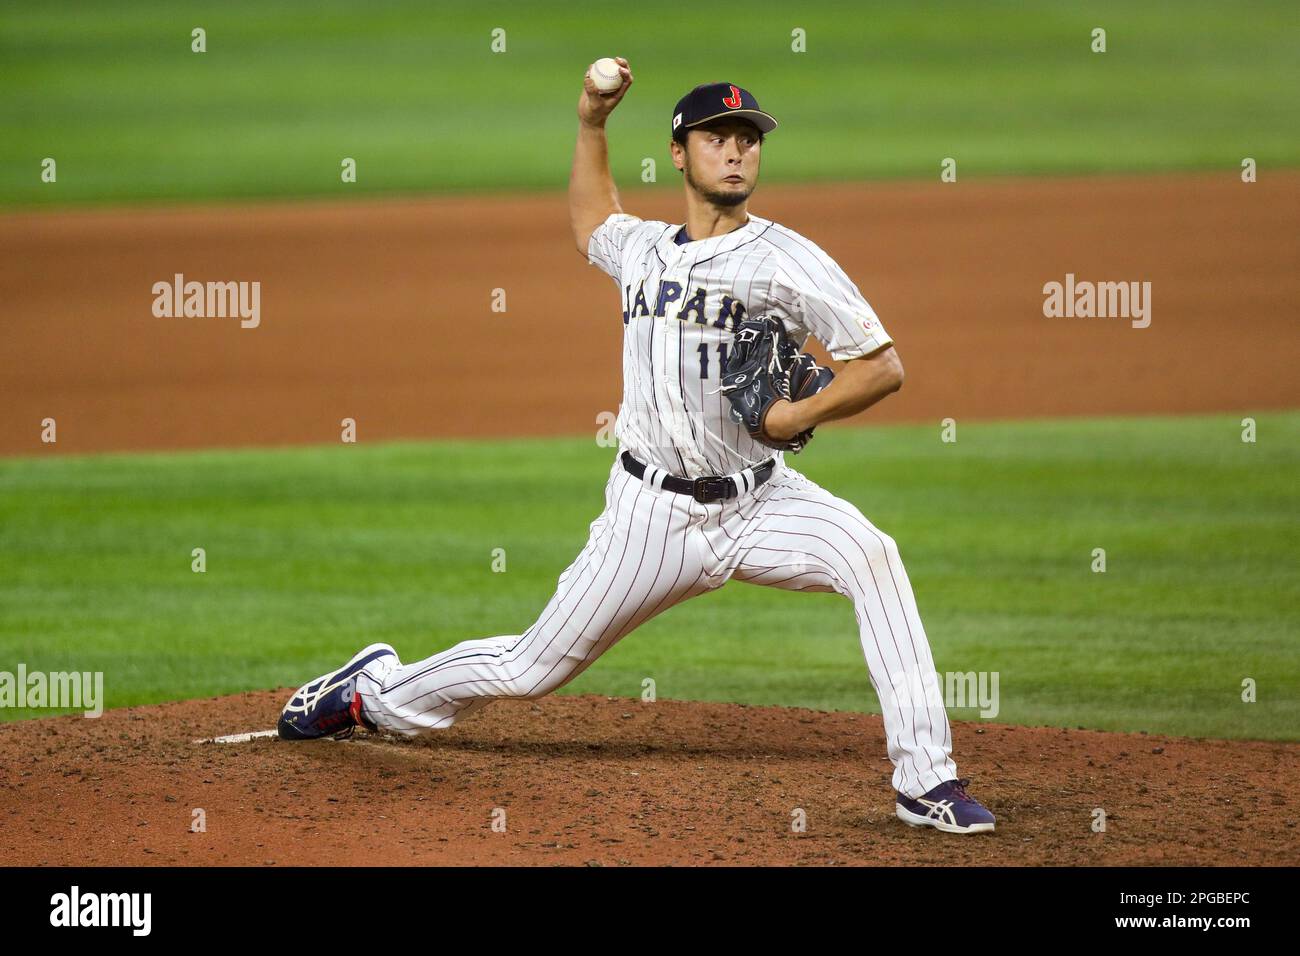 2009 world series hi-res stock photography and images - Alamy